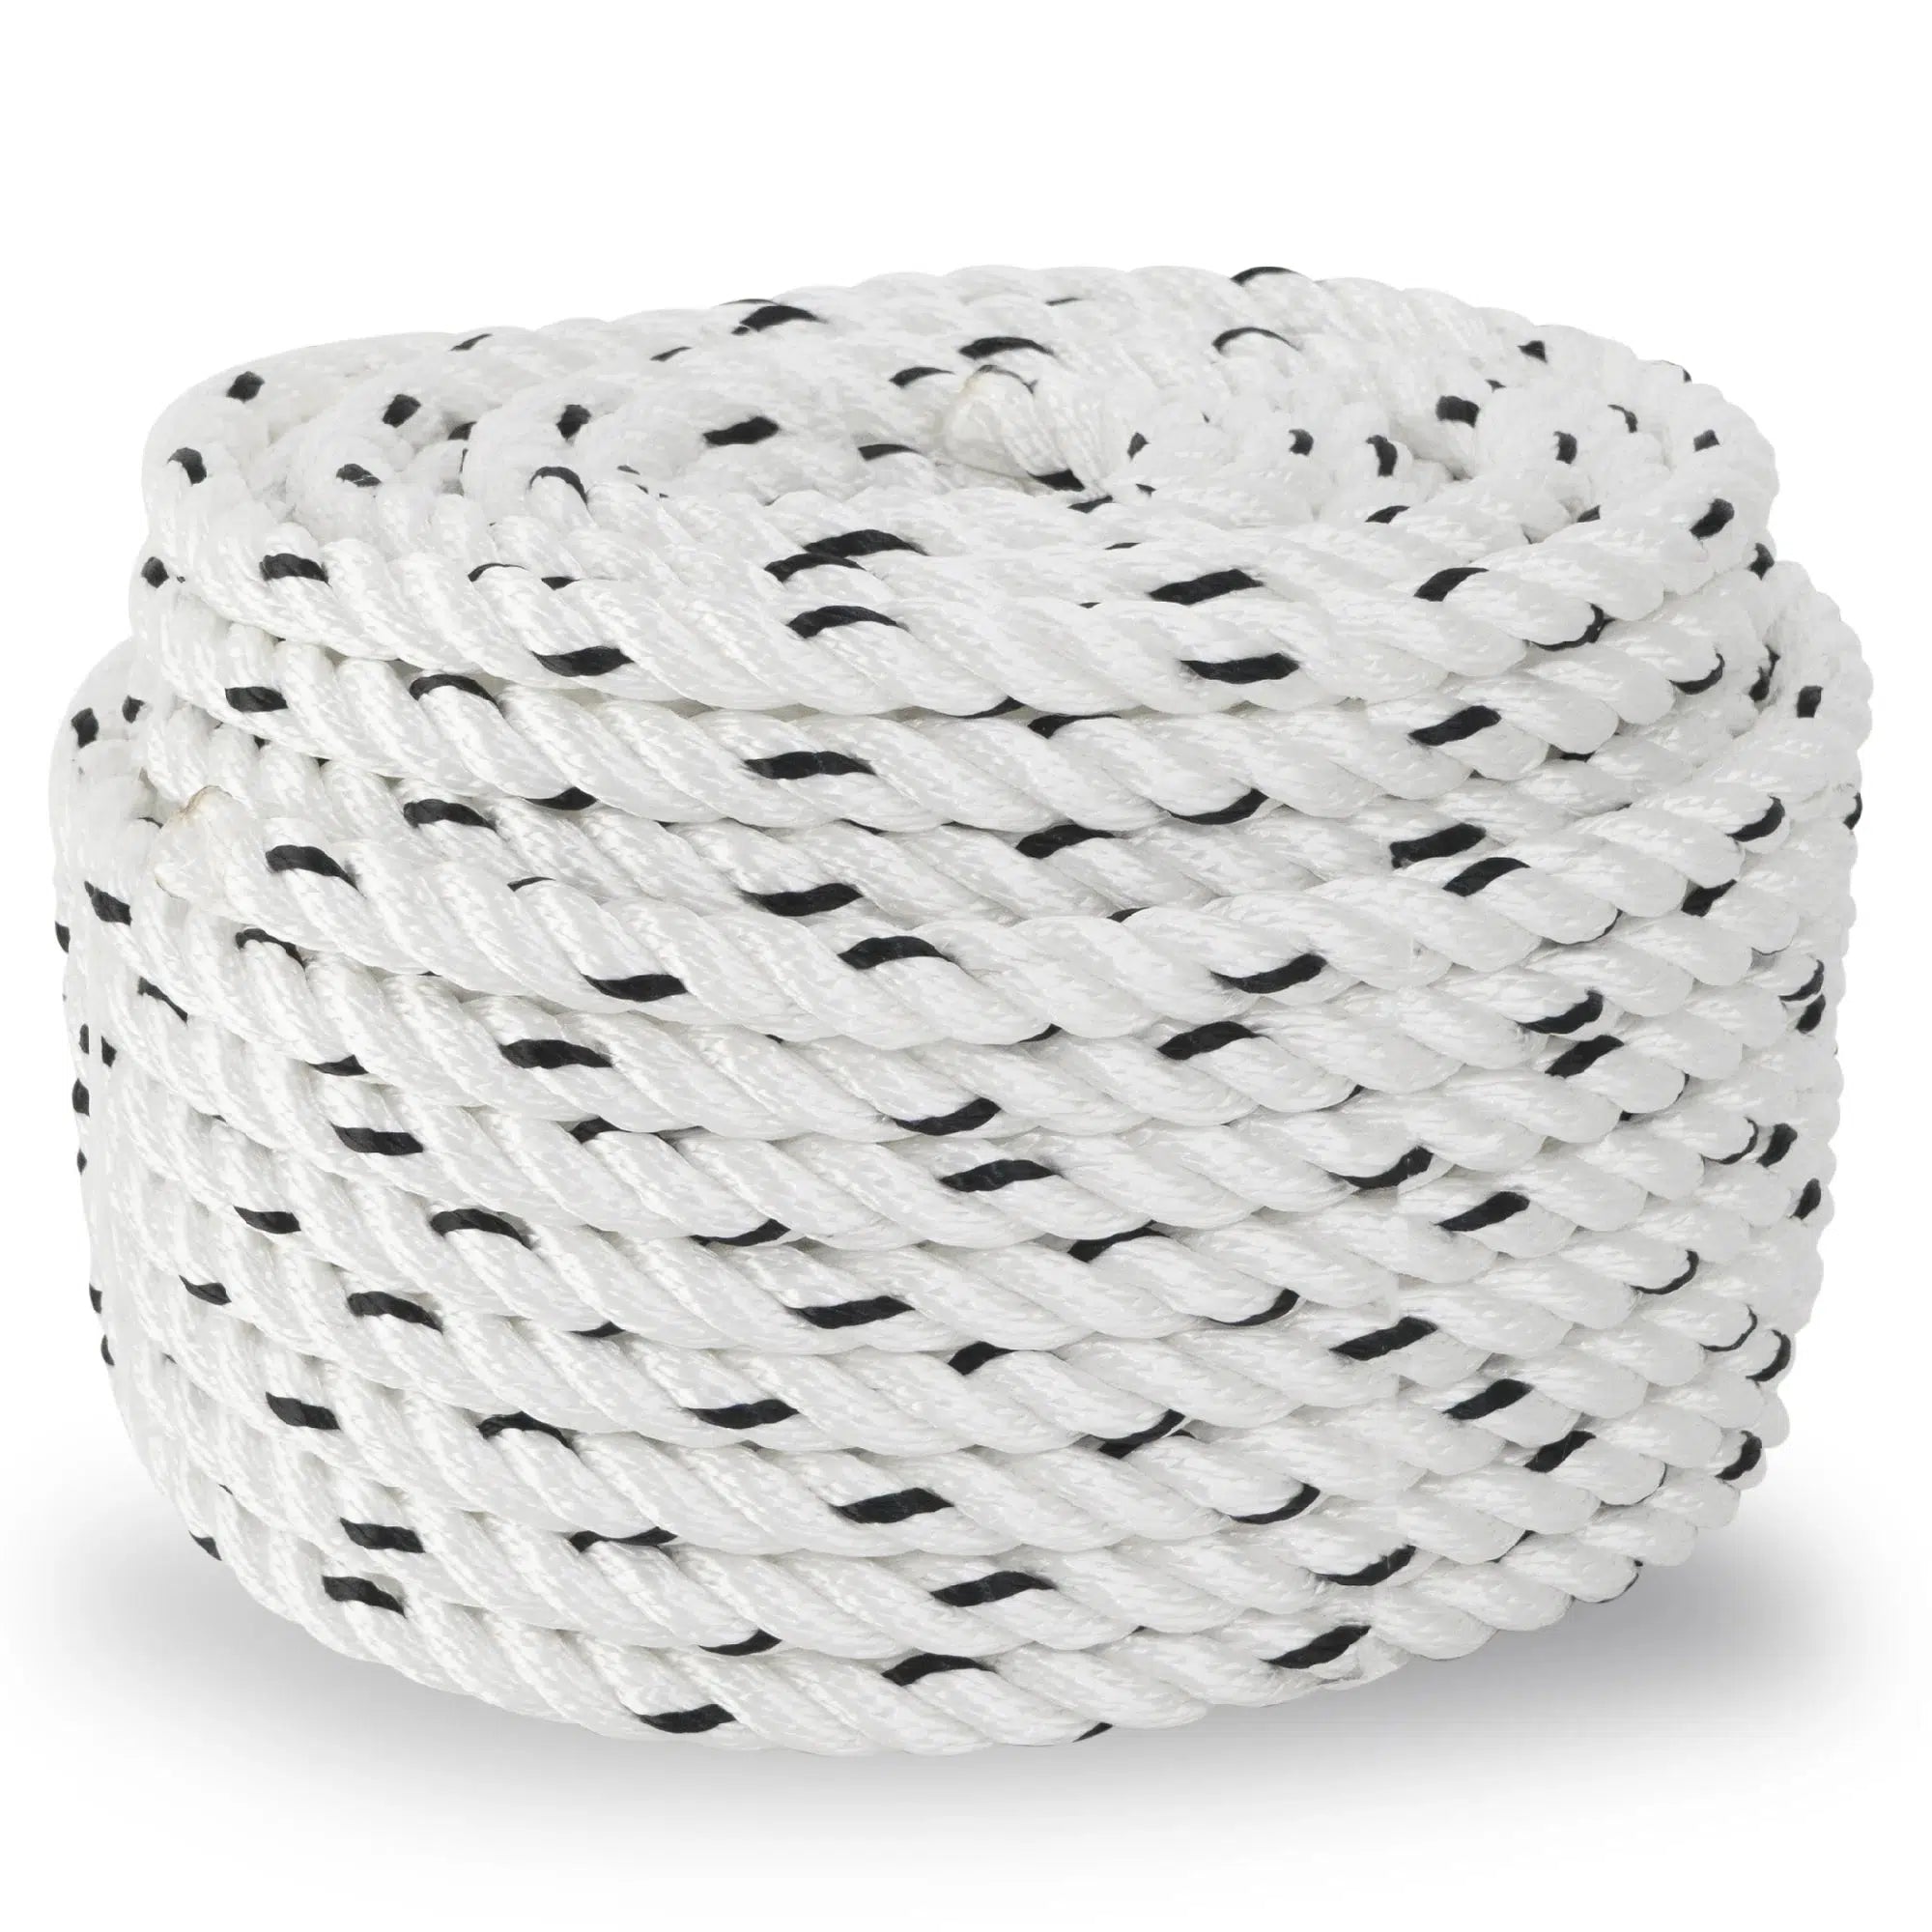 Five Oceans Marine Premium Anchor Line, 1/2 in by 150 ft White 3-Strand Nylon Twisted Rope, Spliced, 1/2 in SS Thimble, 1/4 in SS Shackle Fo4486-c150